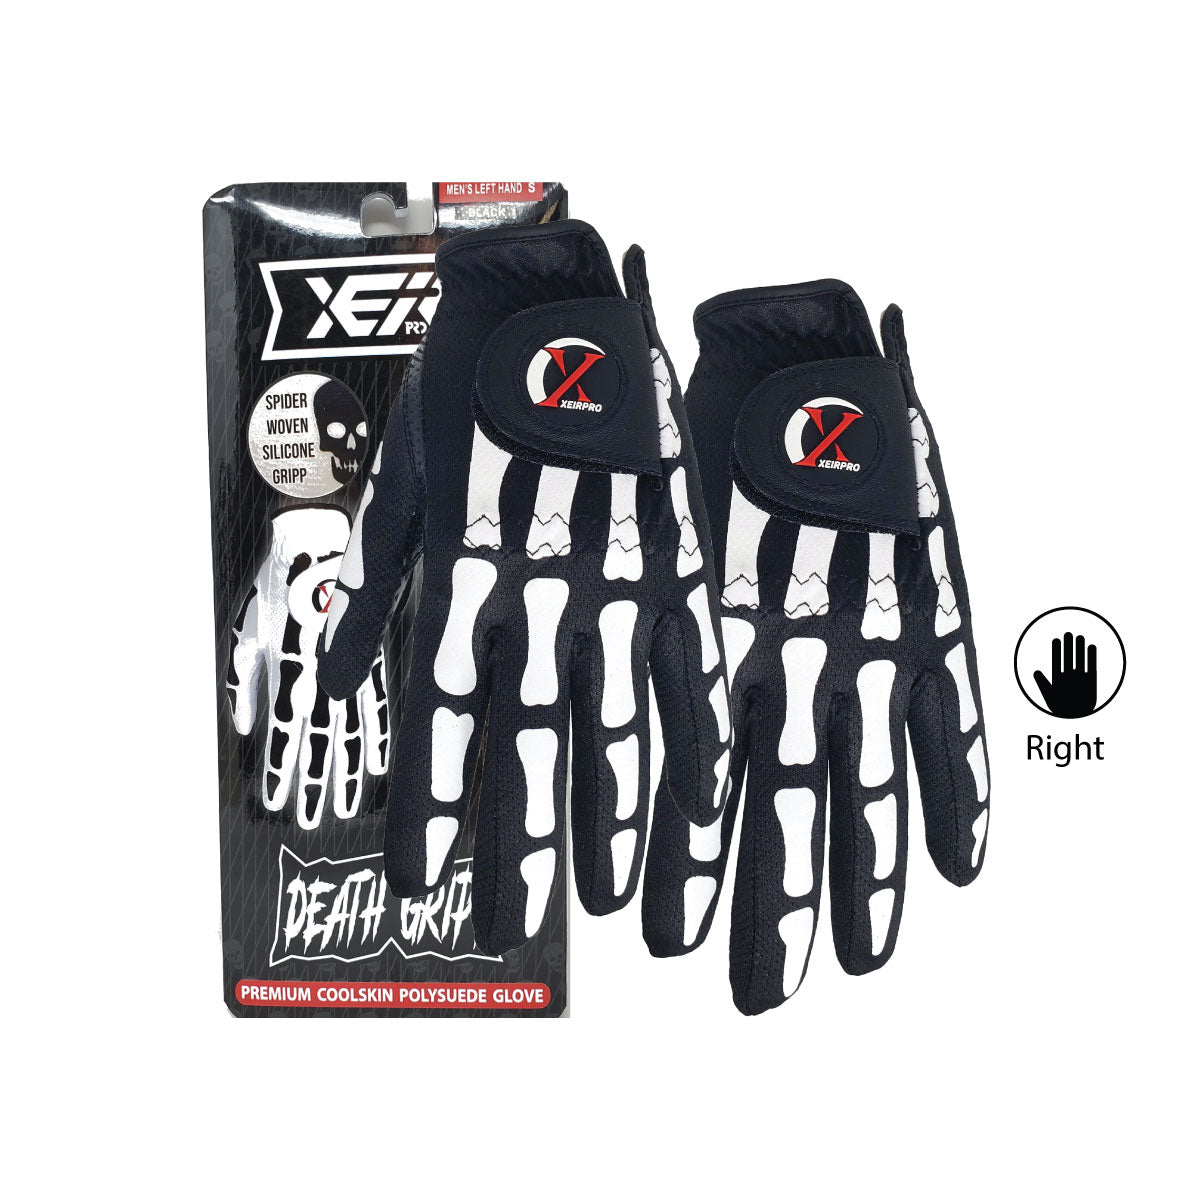 XEIR PRO Men's Death Grip Golf Gloves(2pack, Worn on Right Hand for Left Handed Golfer)